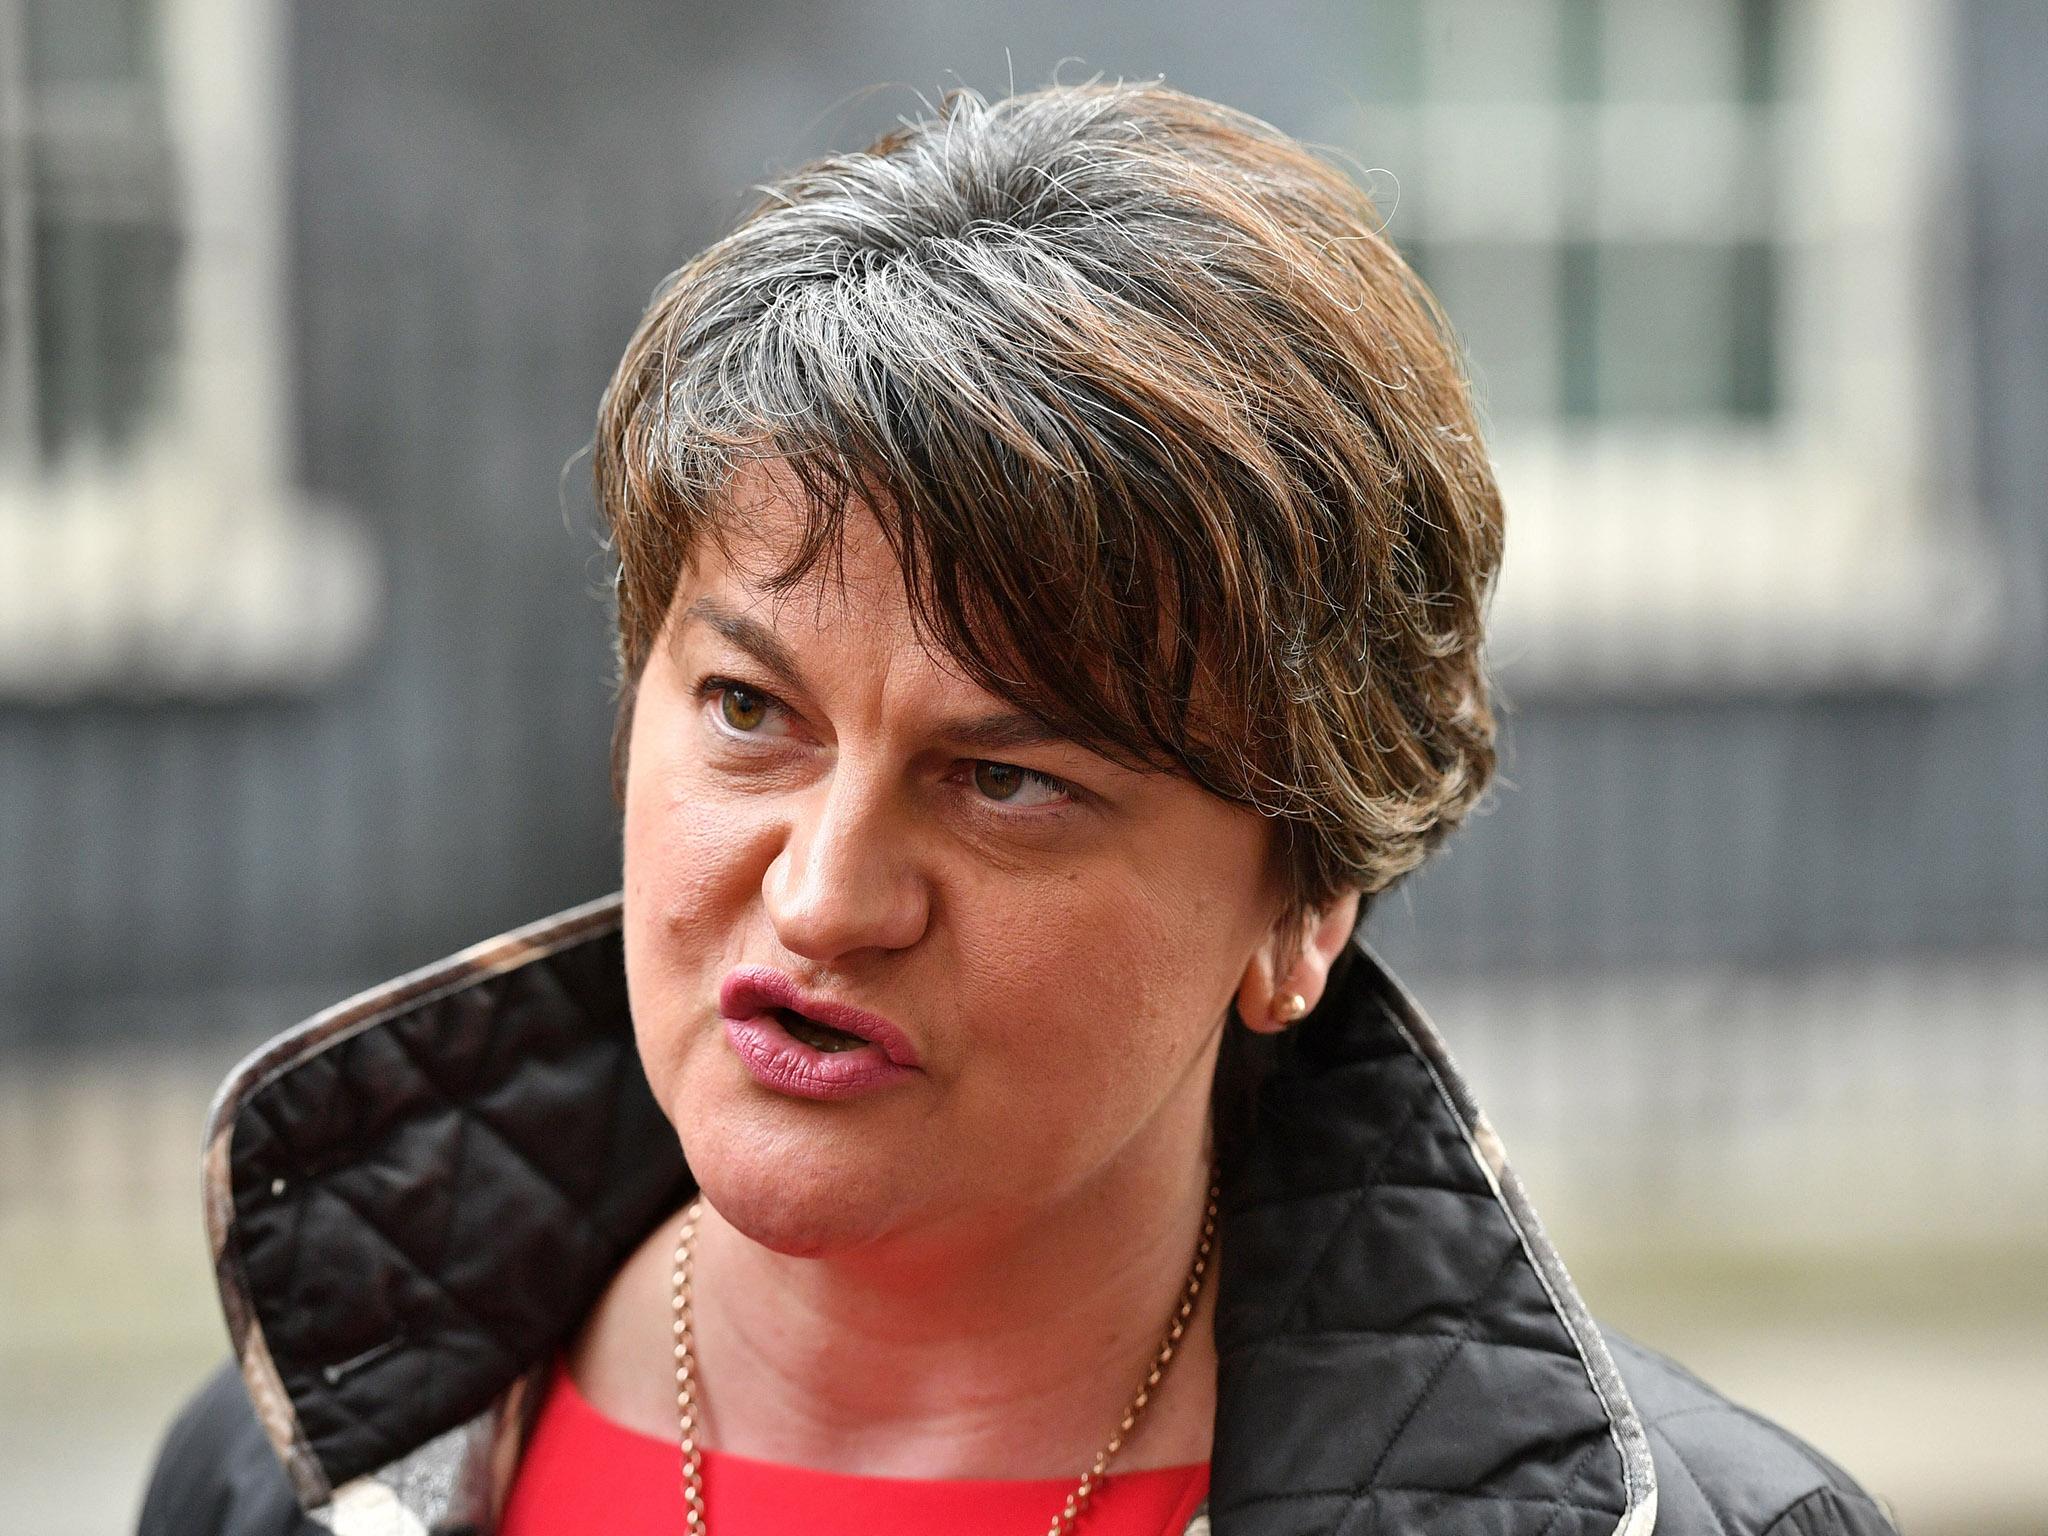 DUP's Arlene Foster warned against using 'threats of violence' as a bargaining chip in Brexit talks